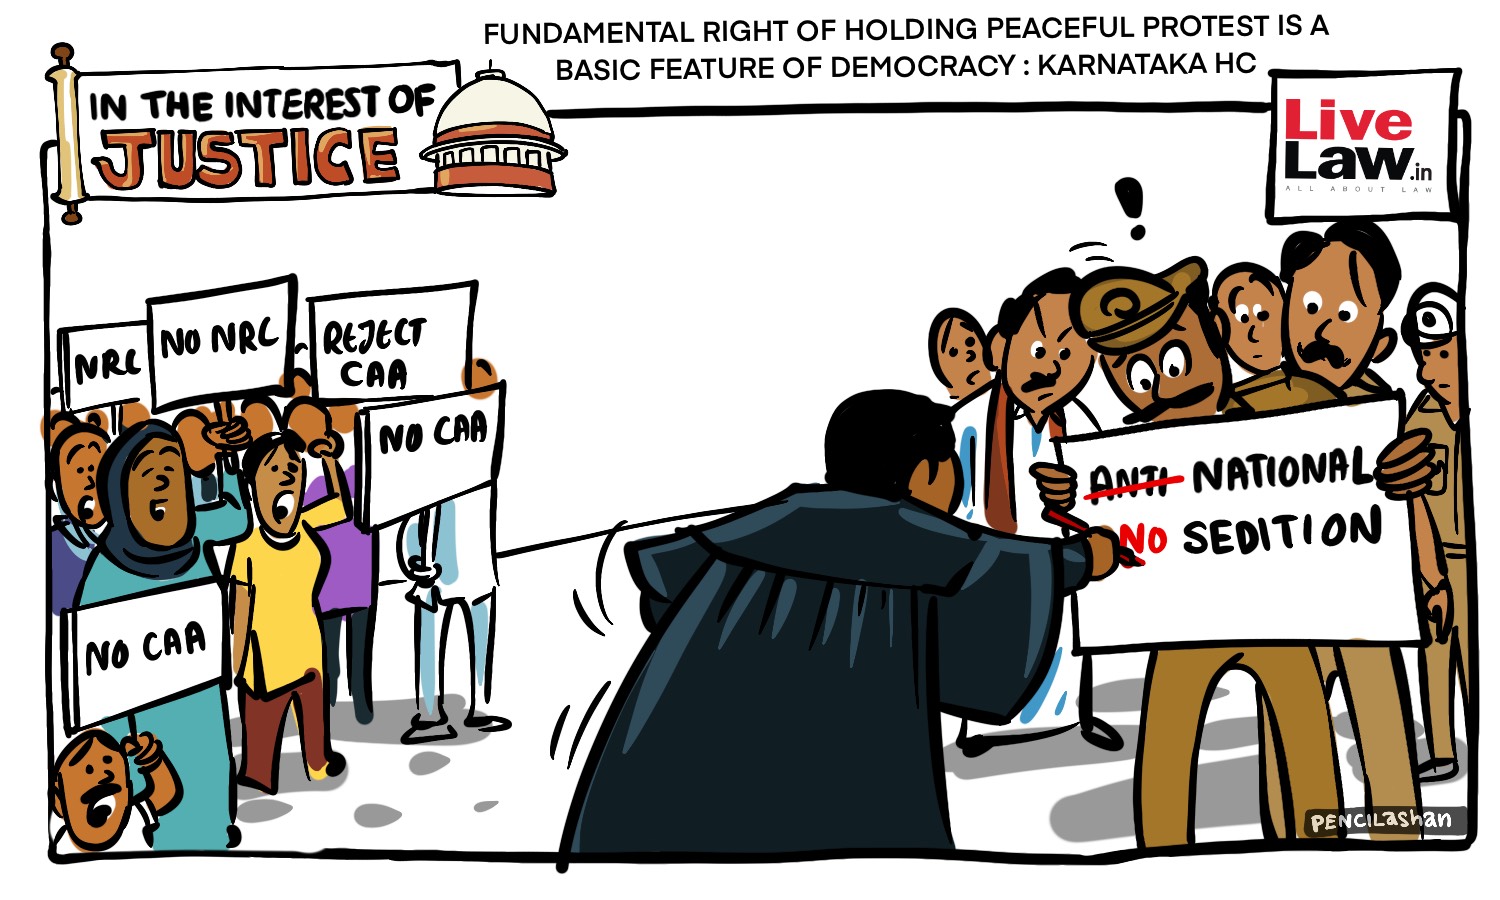 [CARTOON] Fundamental Right Of Holding Peaceful Protest Is A Basic Feature Of Democracy : Karnataka HC